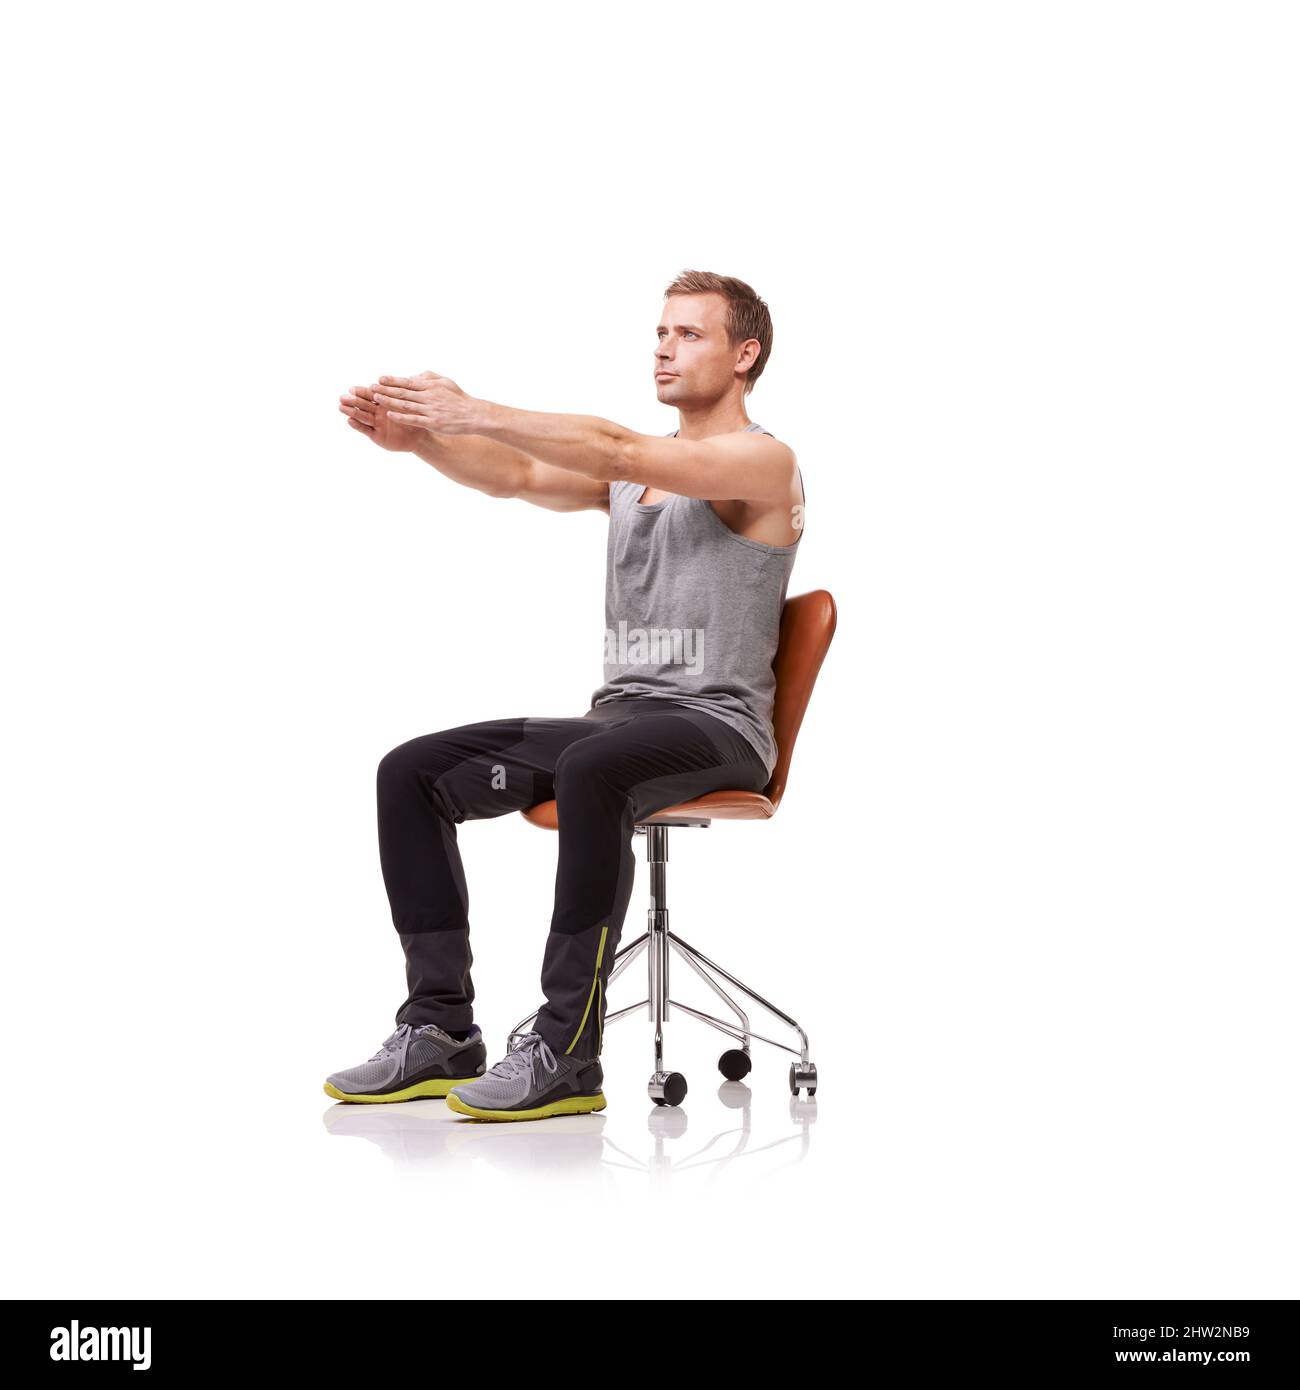 Keeping his limbs long and lean. A handsome young man wearing gym clothes and stretching while seated in an office chair against a white background. Stock Photo